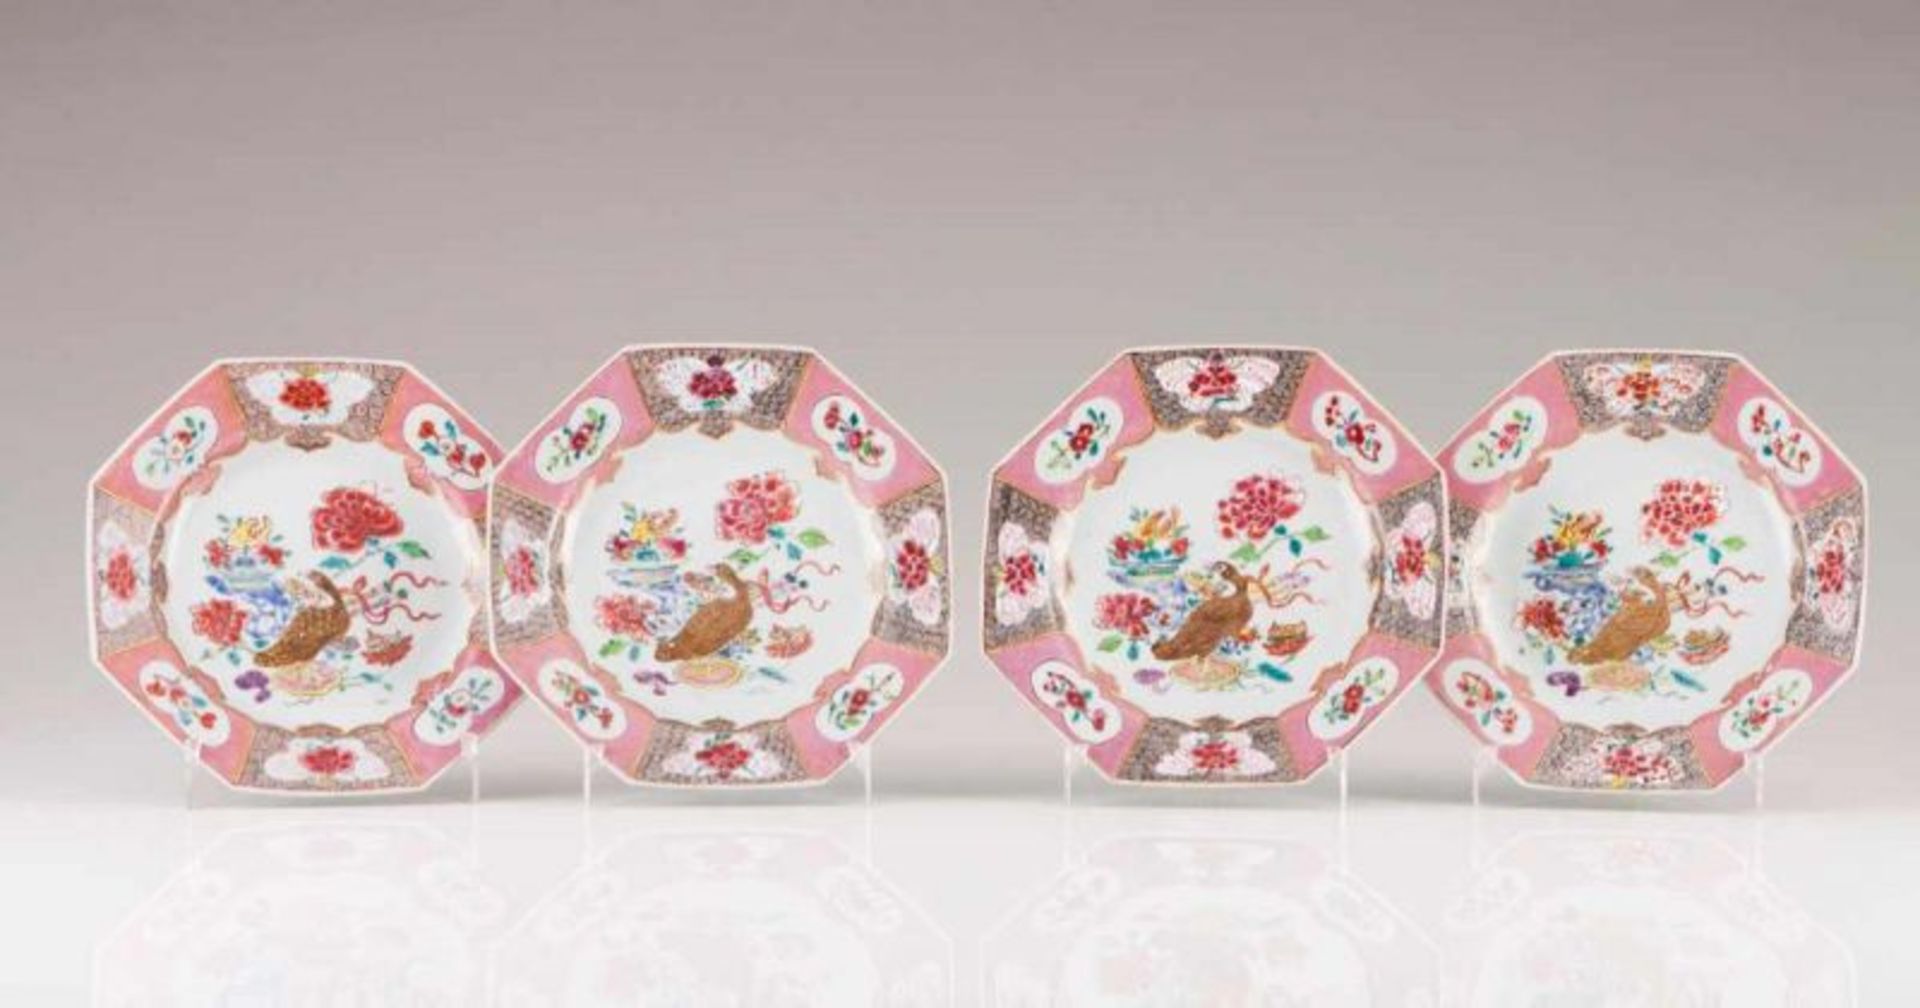 A pair of octogonal plates Chinese export porcelain Polychrome and gilt decoration depicting flowers